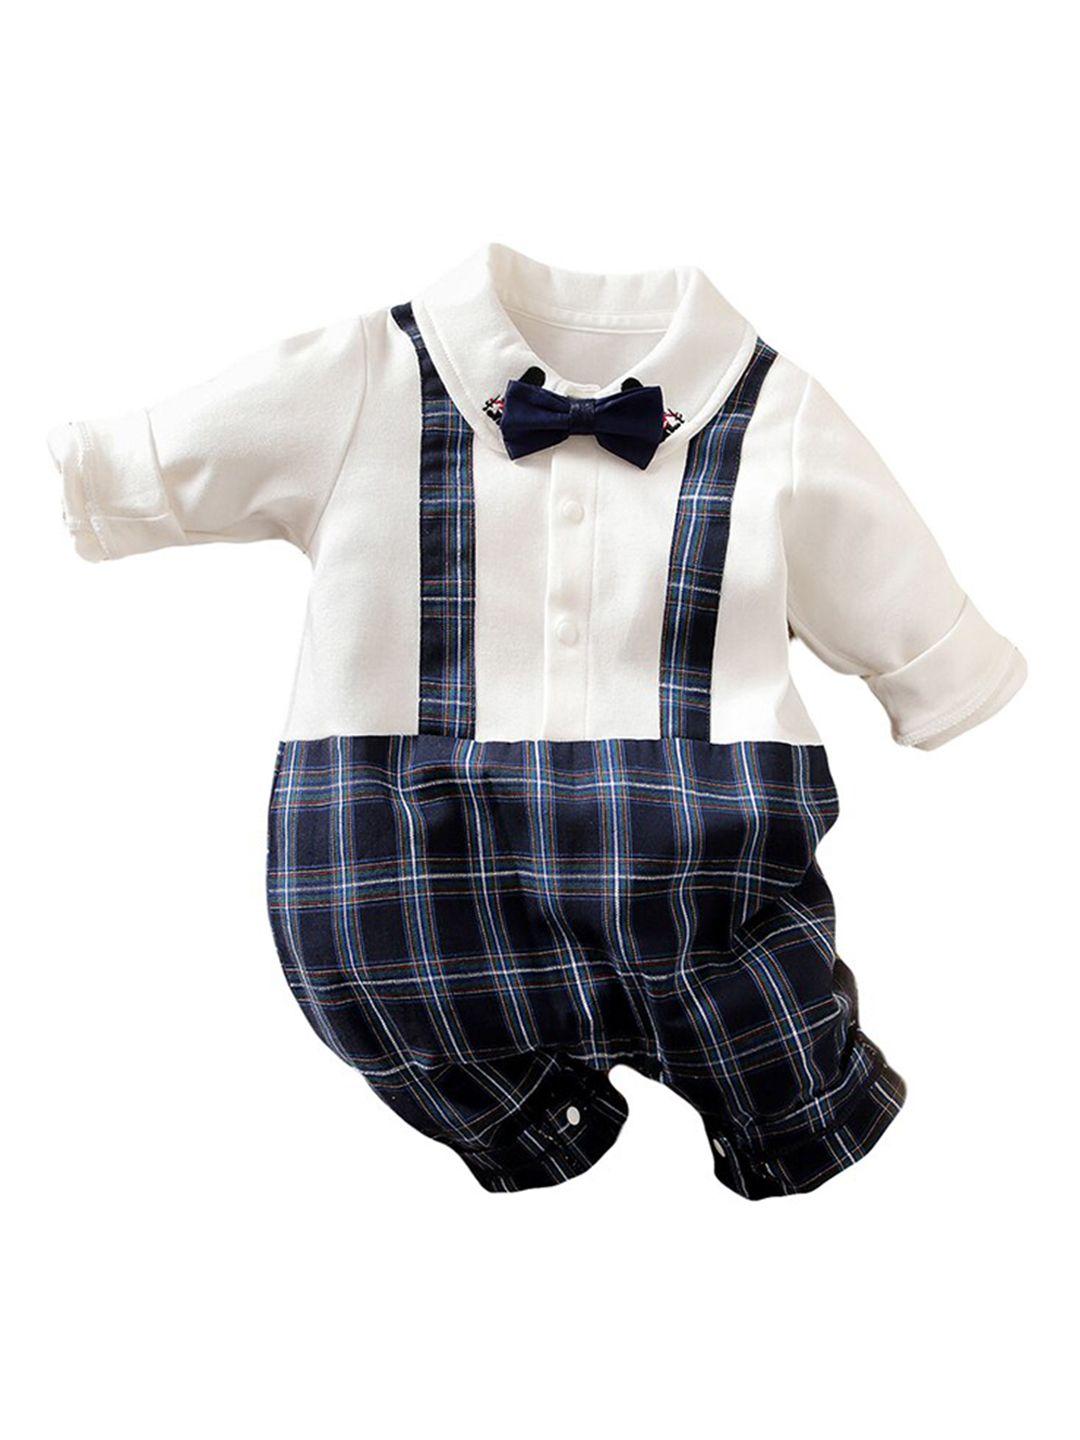 stylecast-infant-boys-navy-blue-checked-pure-cotton-rompers